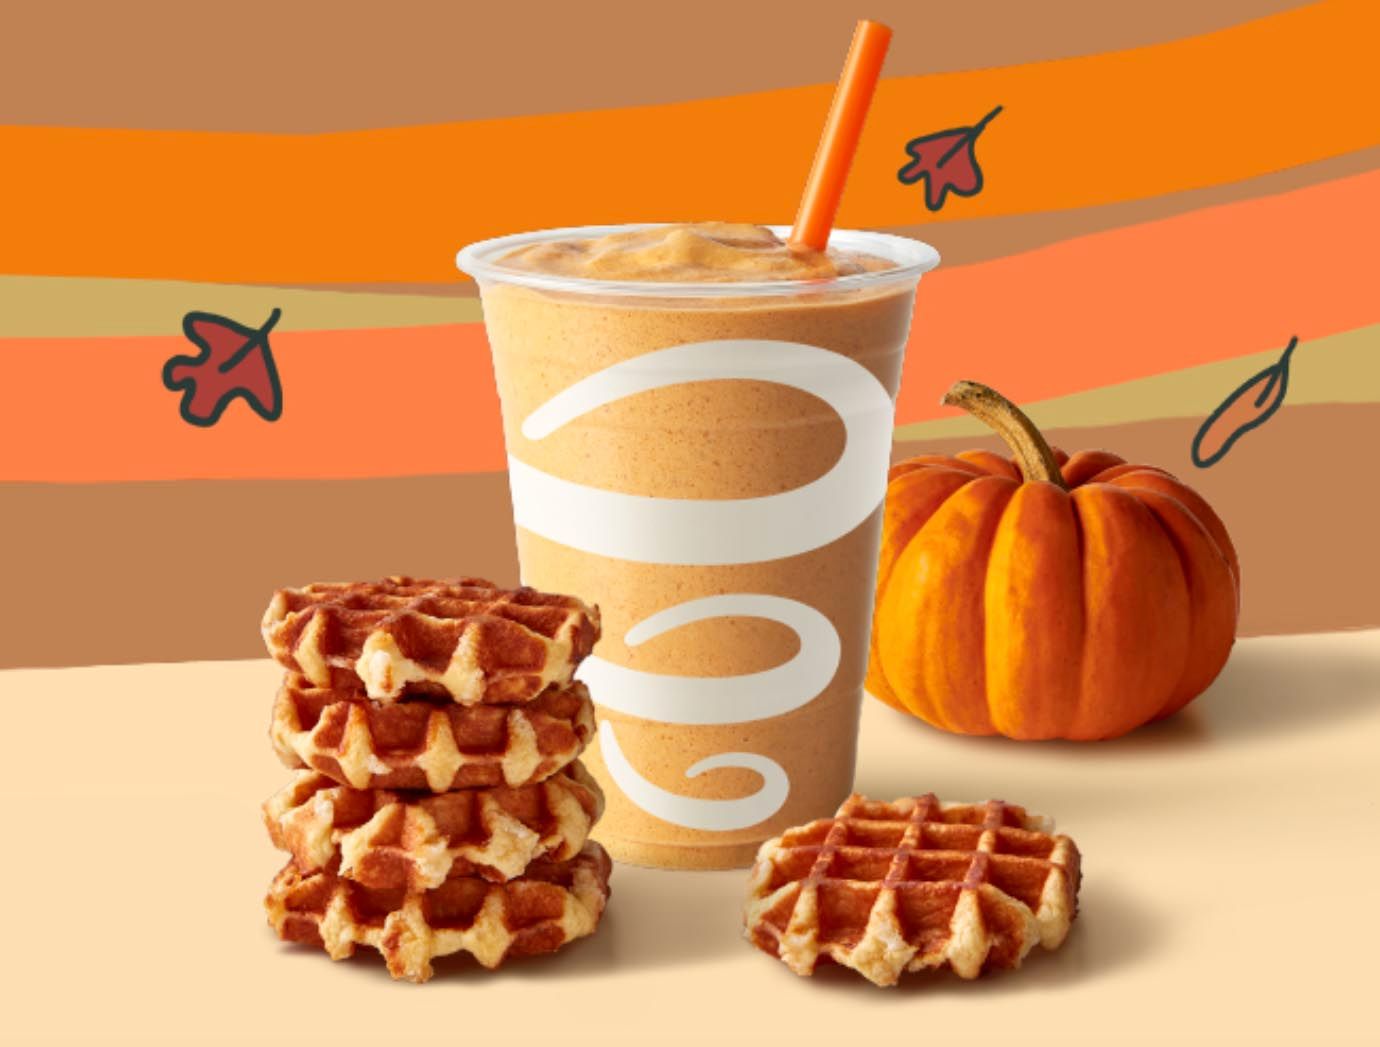 On August 26 and 27 My Jamba Rewards Members Can Get a $1 Waffle with a Select Beverage Purchase Online